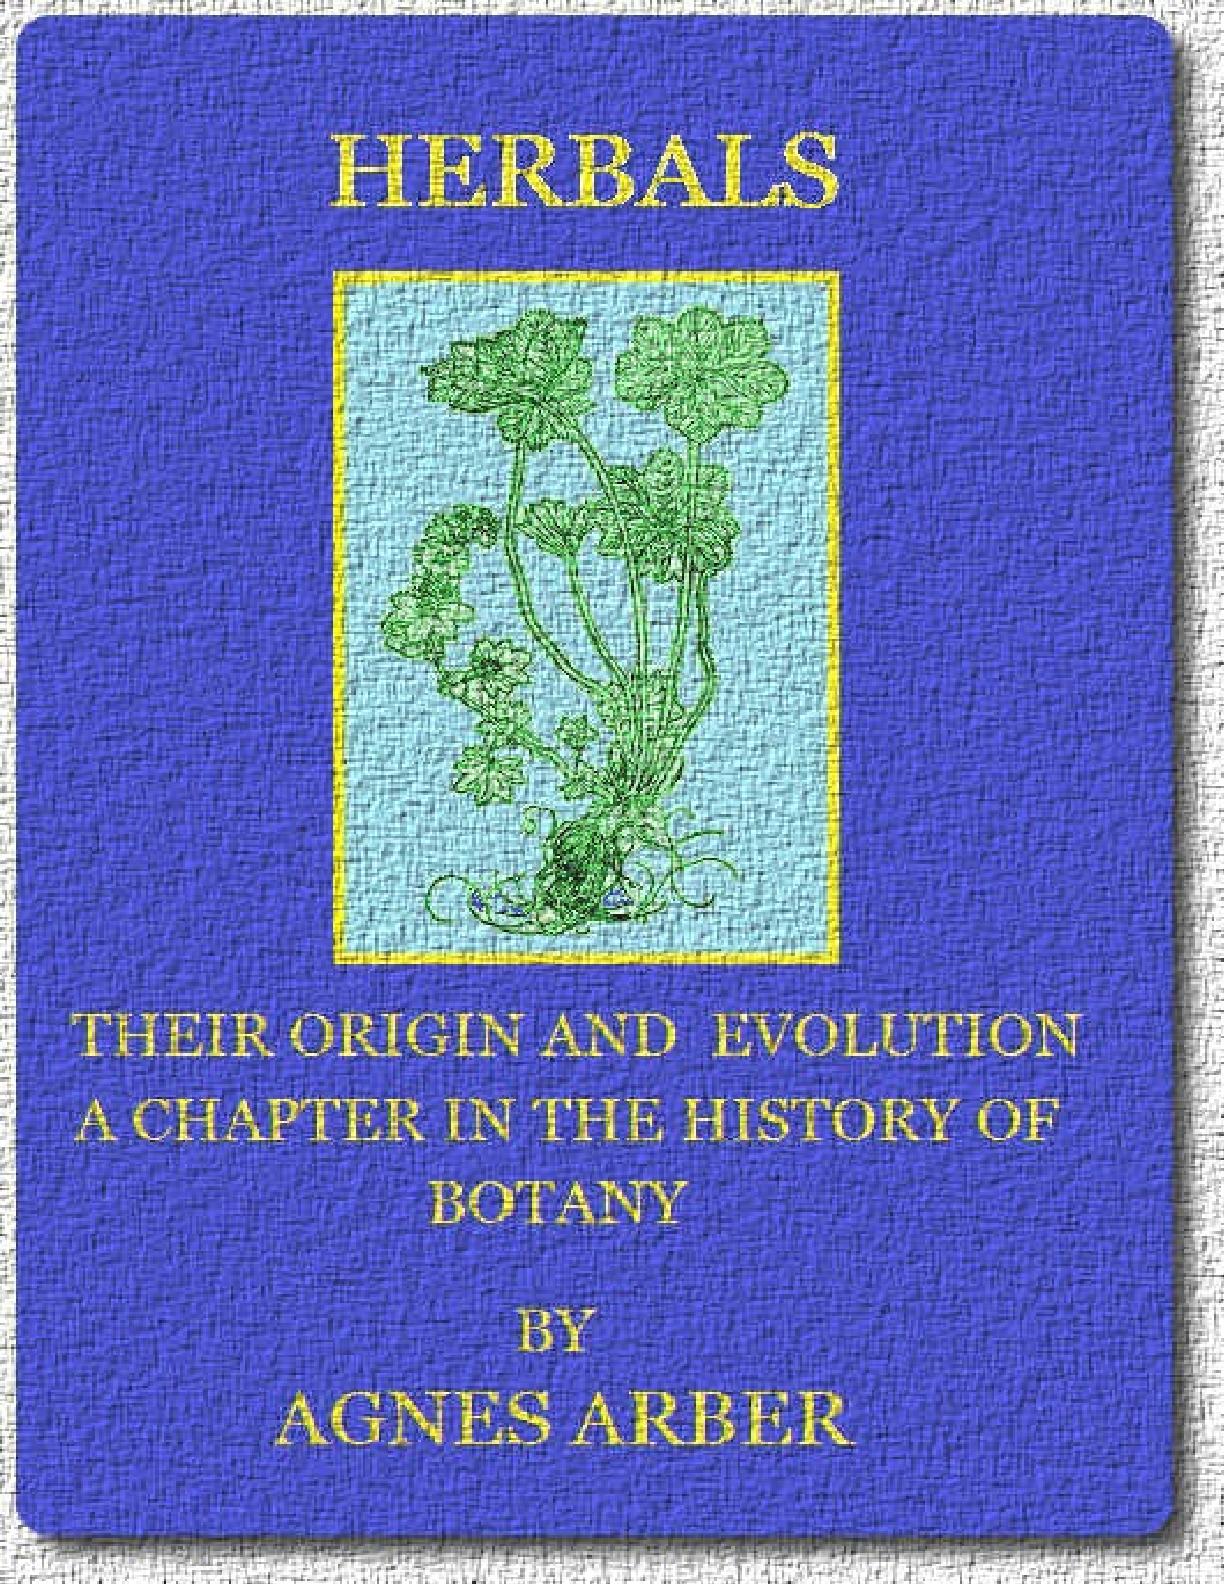 Download Herbals, Their Origin and Evolution A Chapter in the History of Botany 1470-1670 | PDF Host